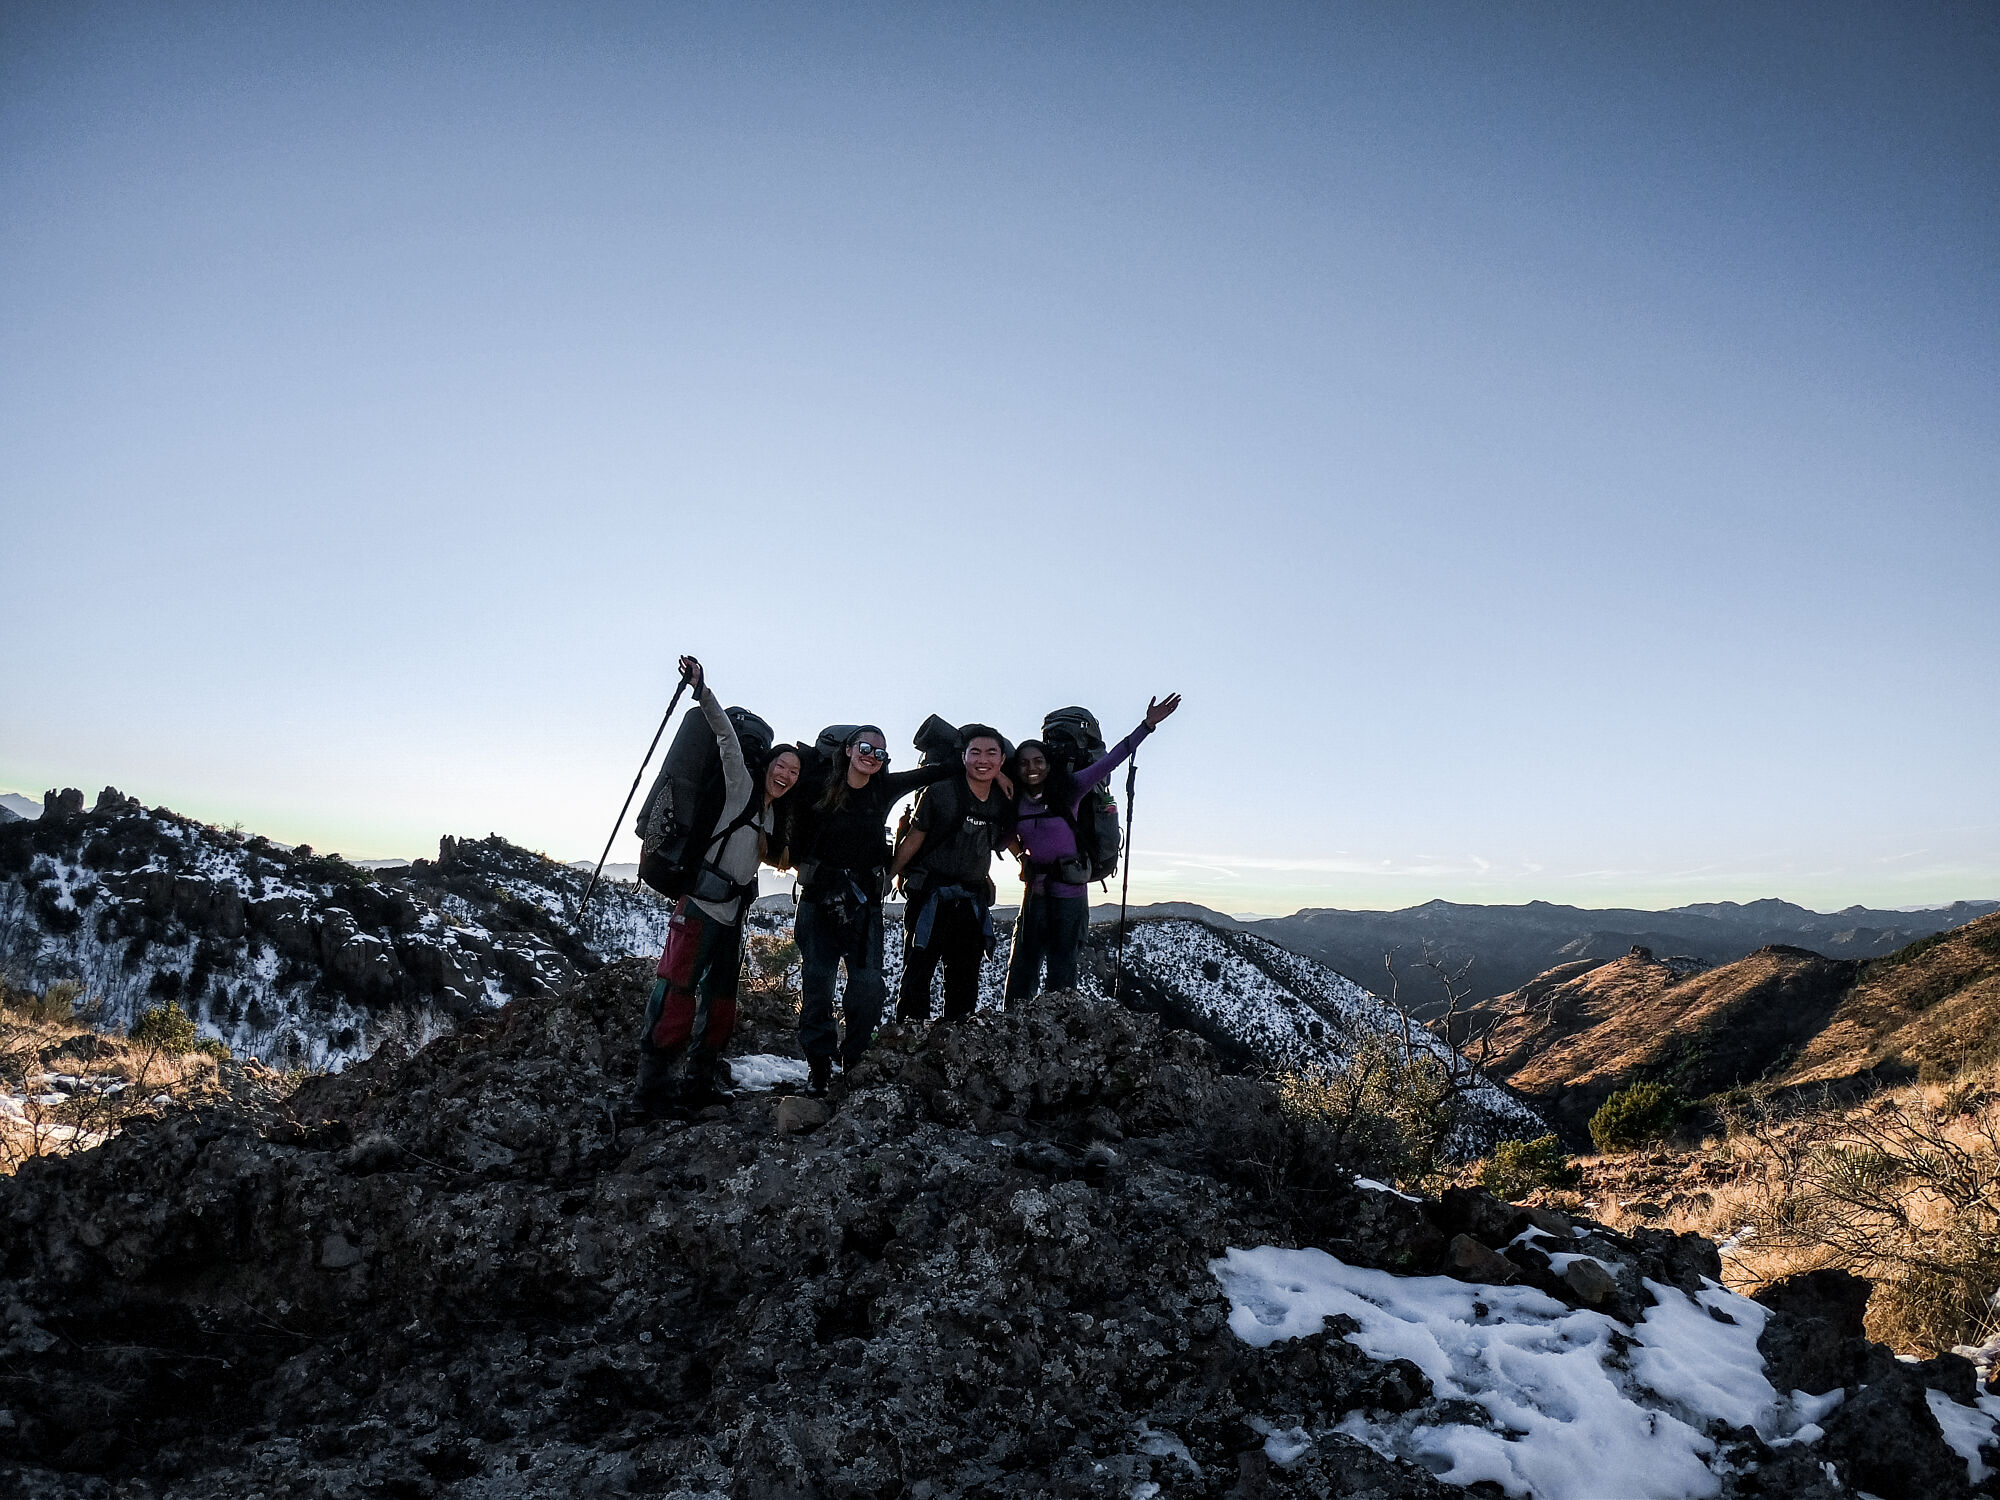 Business school students on a NOLS expedition smile for a photo on top of a snowy mound